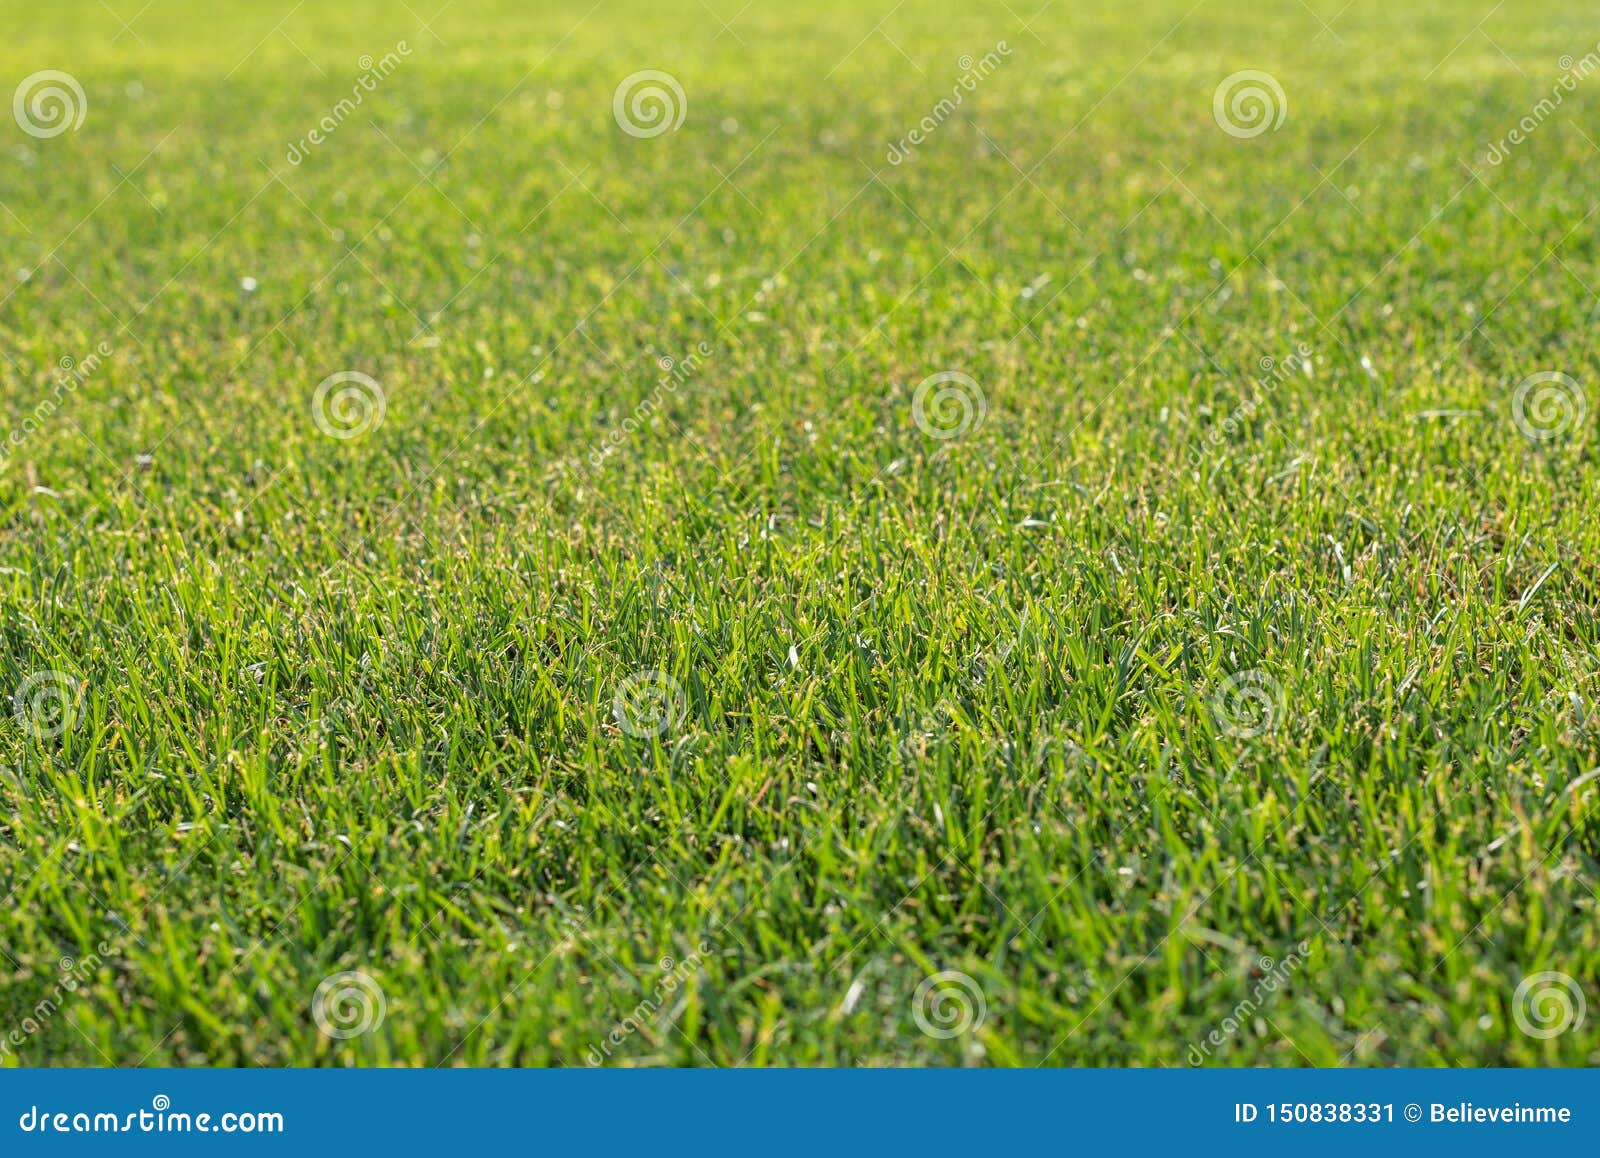 Green Grass Lawn Or Football Field. Stock Image - Image of ...